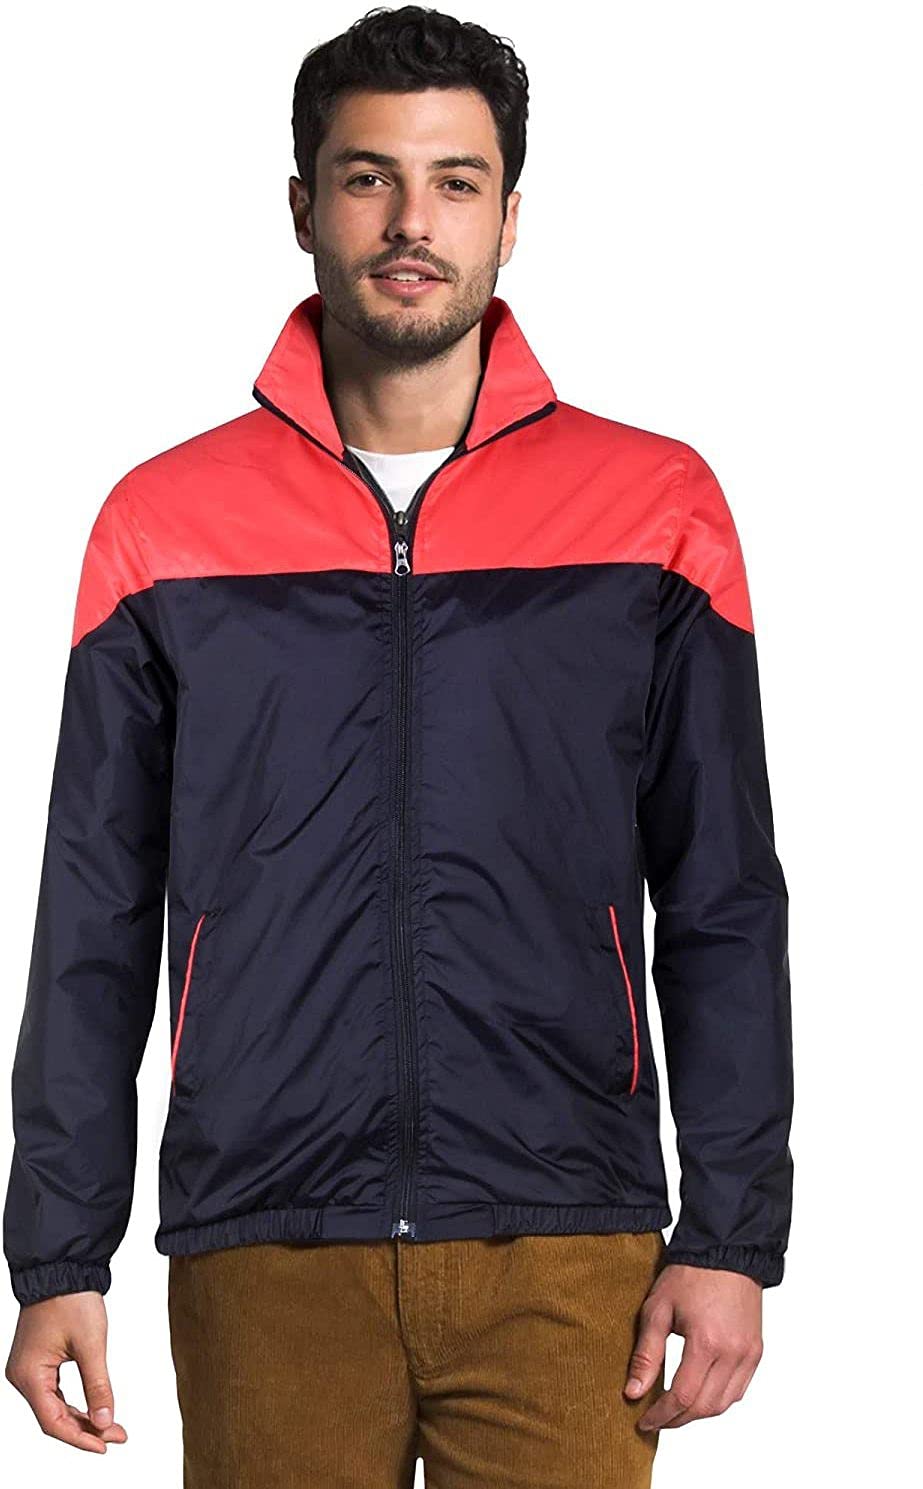 THE CLOWNFISH Men's Activewear Jacket- 2XL Size (Blue & Red)